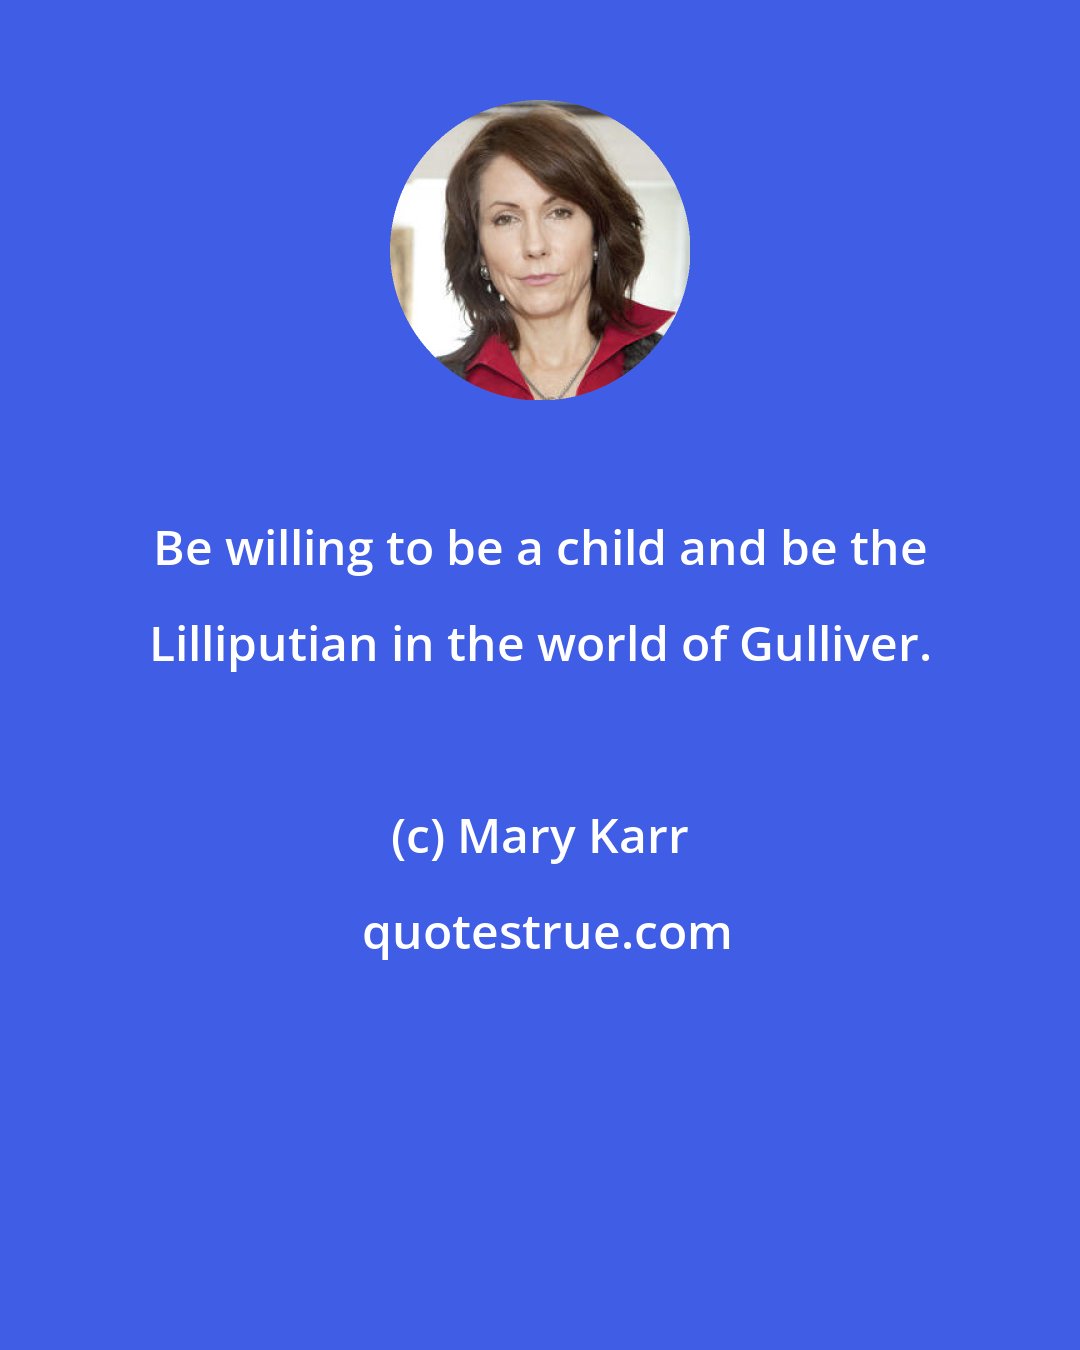 Mary Karr: Be willing to be a child and be the Lilliputian in the world of Gulliver.